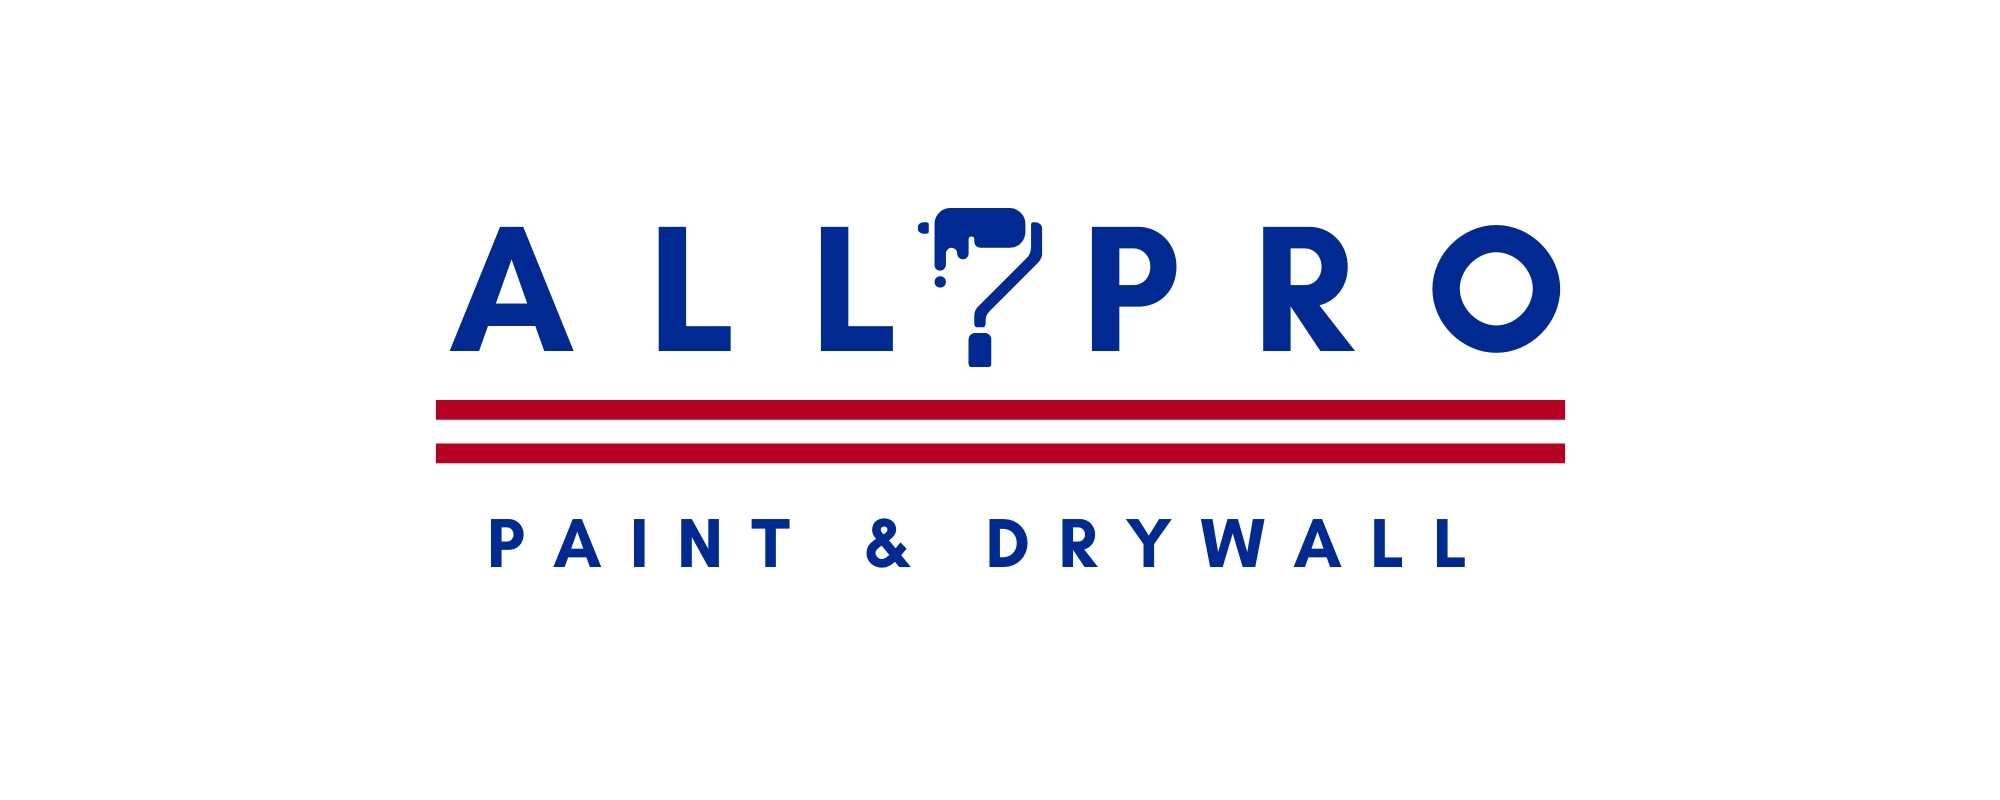 All Pro Painting and Drywall LLC Logo